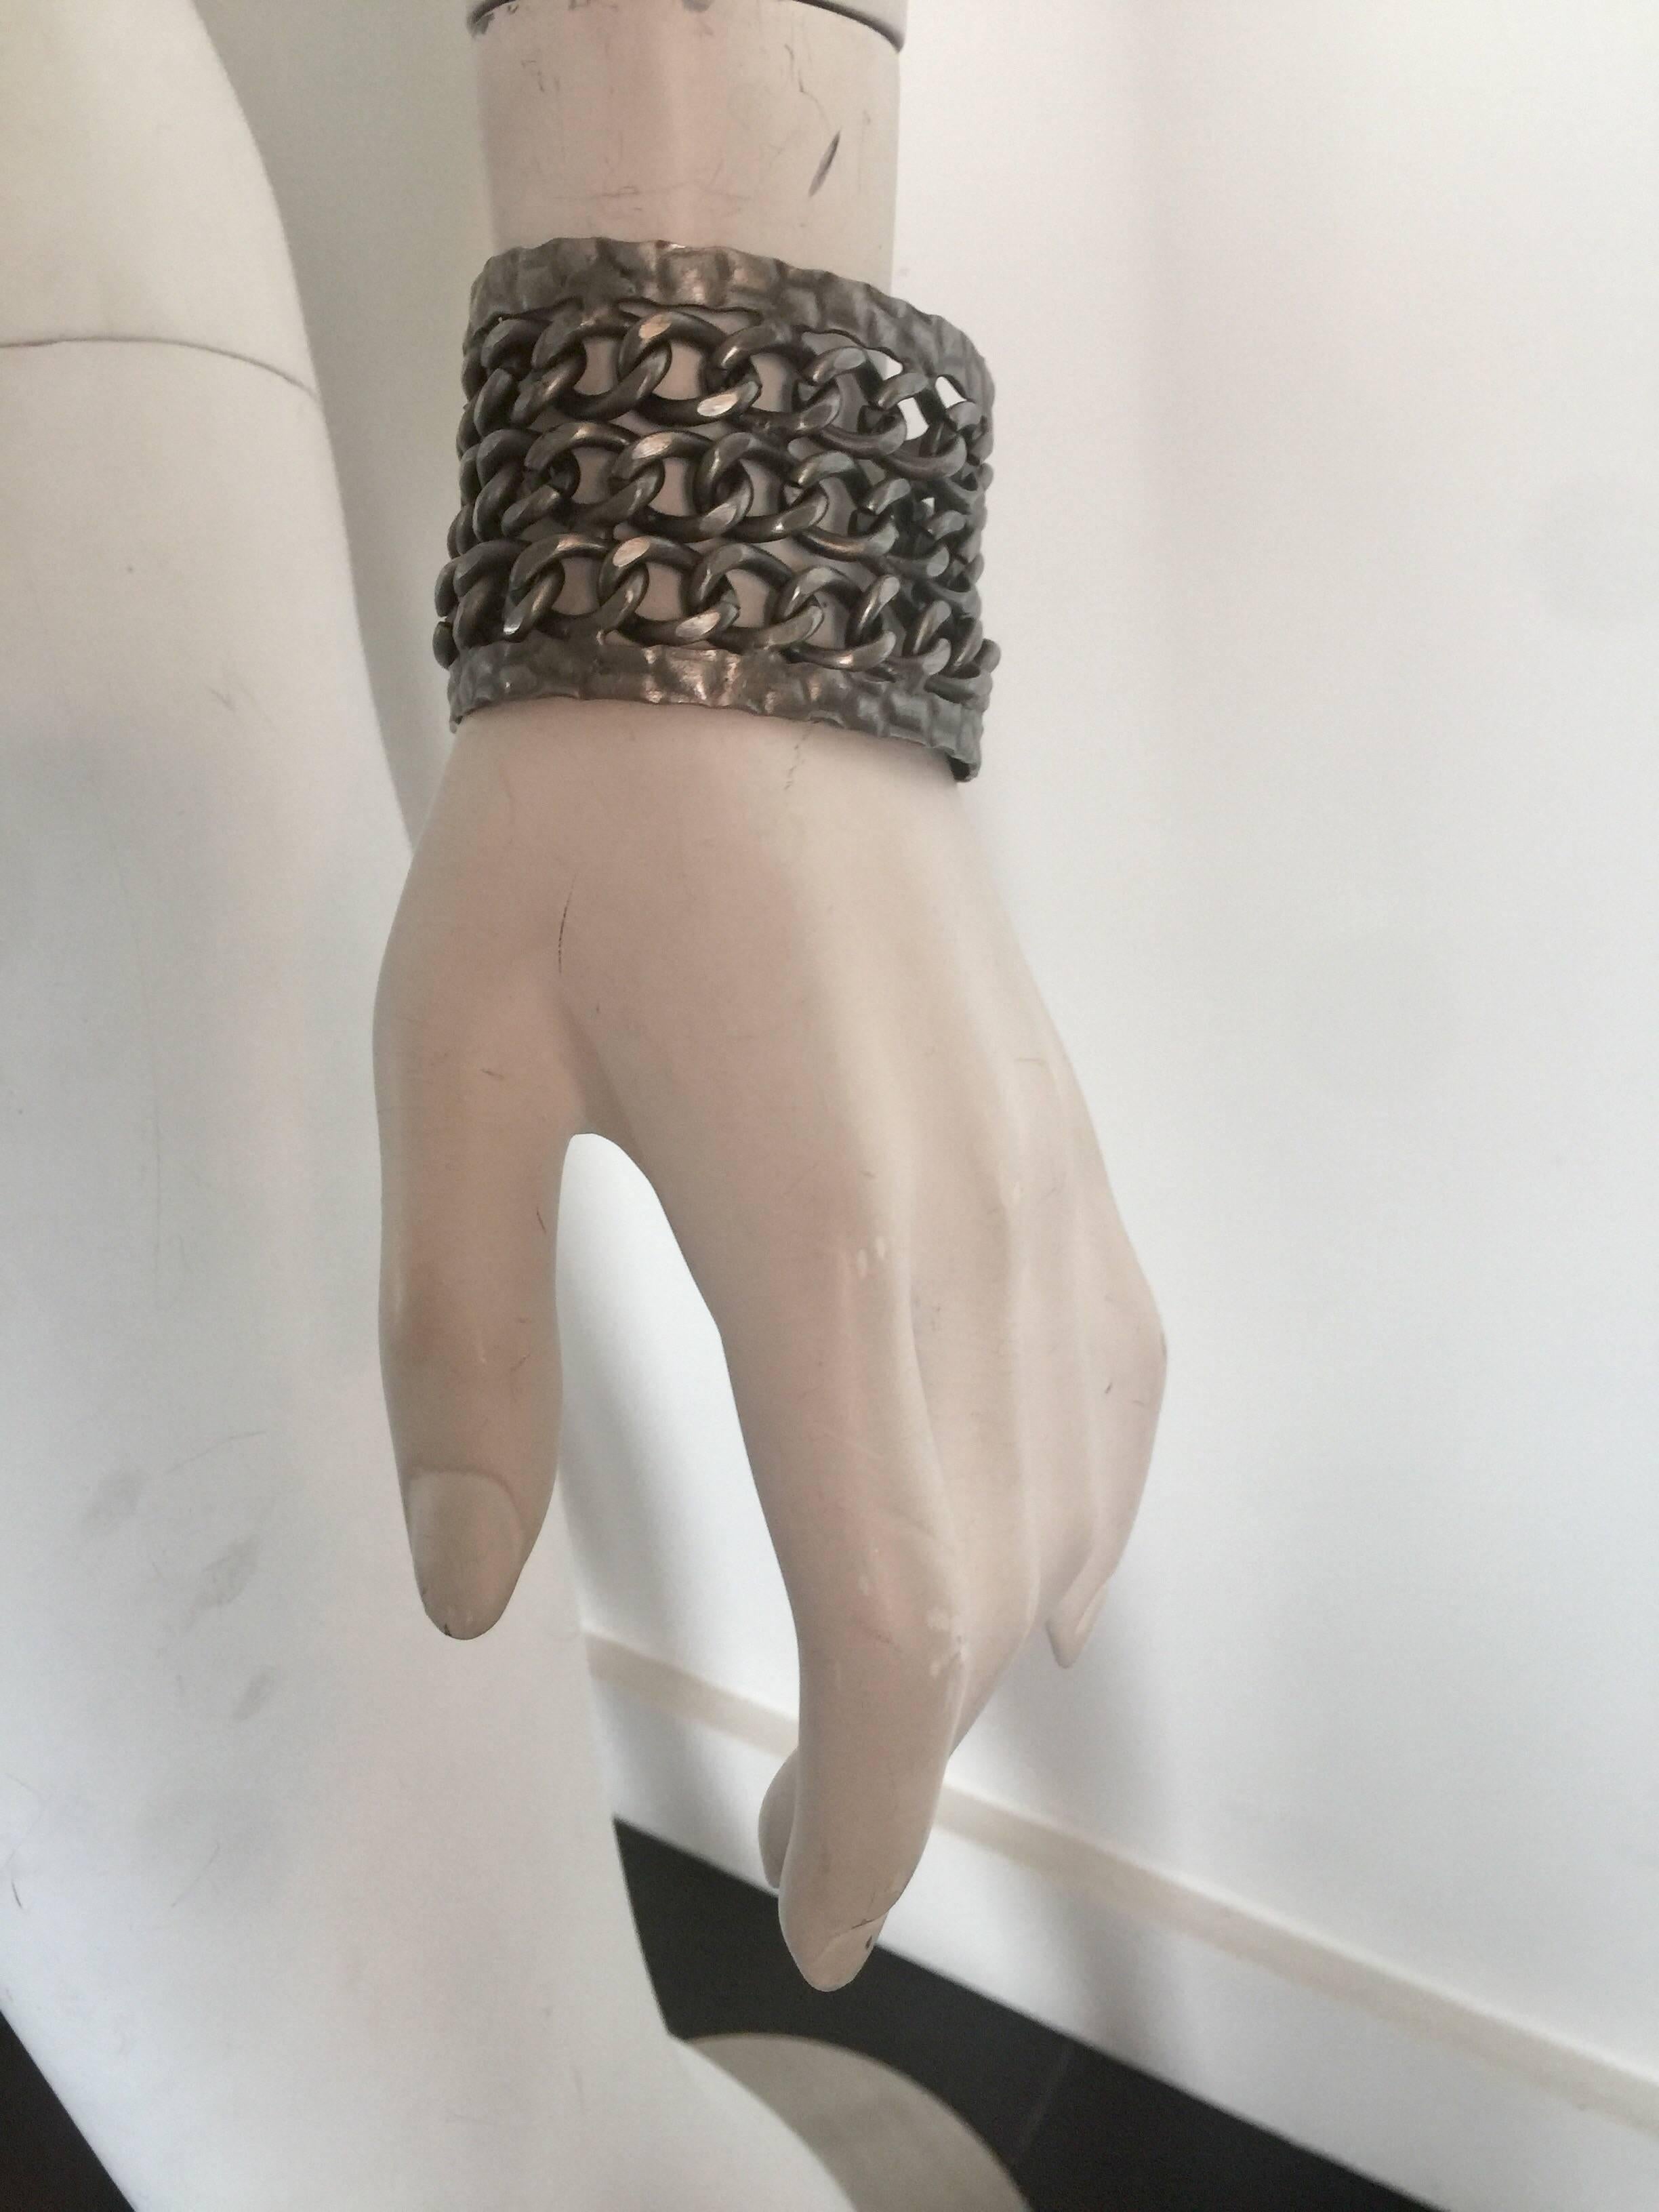 This blackened silver metal tone cuff has three rows of chains.  It is 2 inches wide and 7 long but is fairly adjustable and easy to take on and off.  